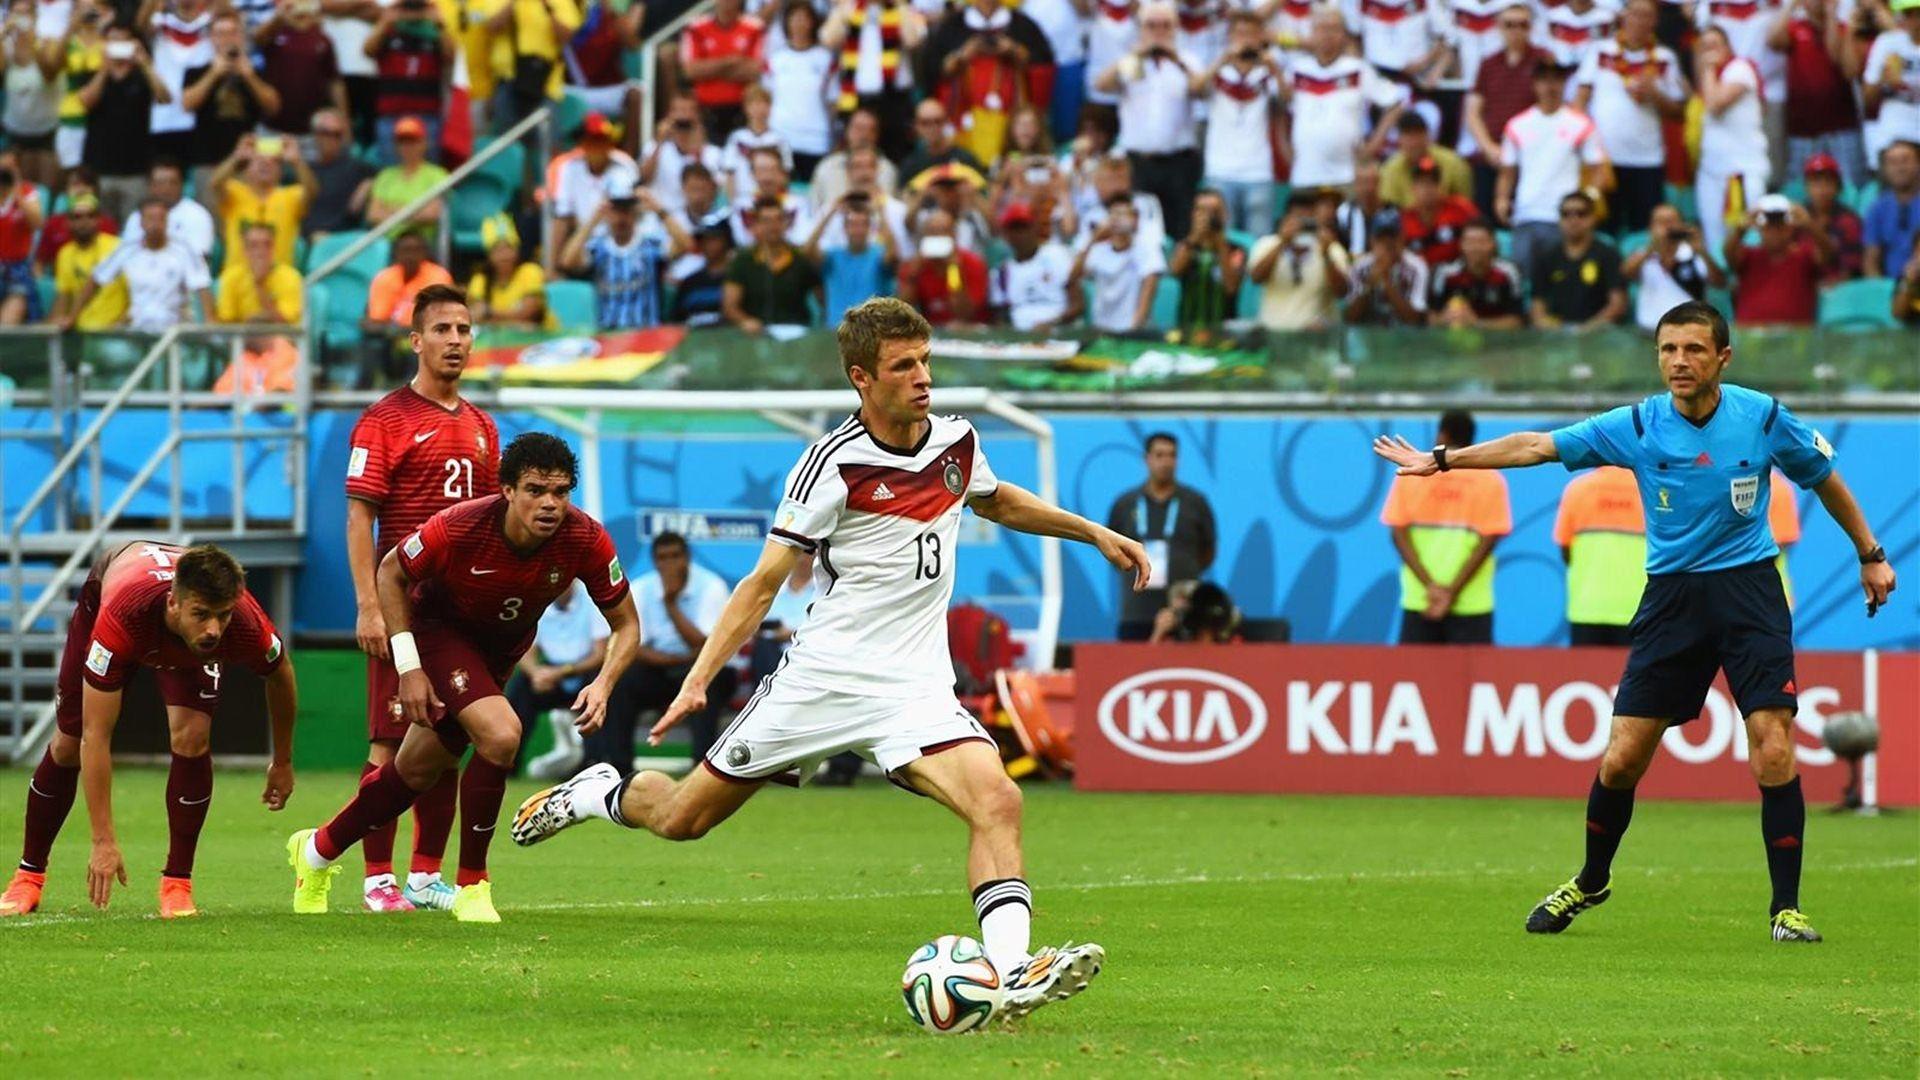 Germany Player Thomas Muller Penalty FIFA World Cup 2014 Wallpaper